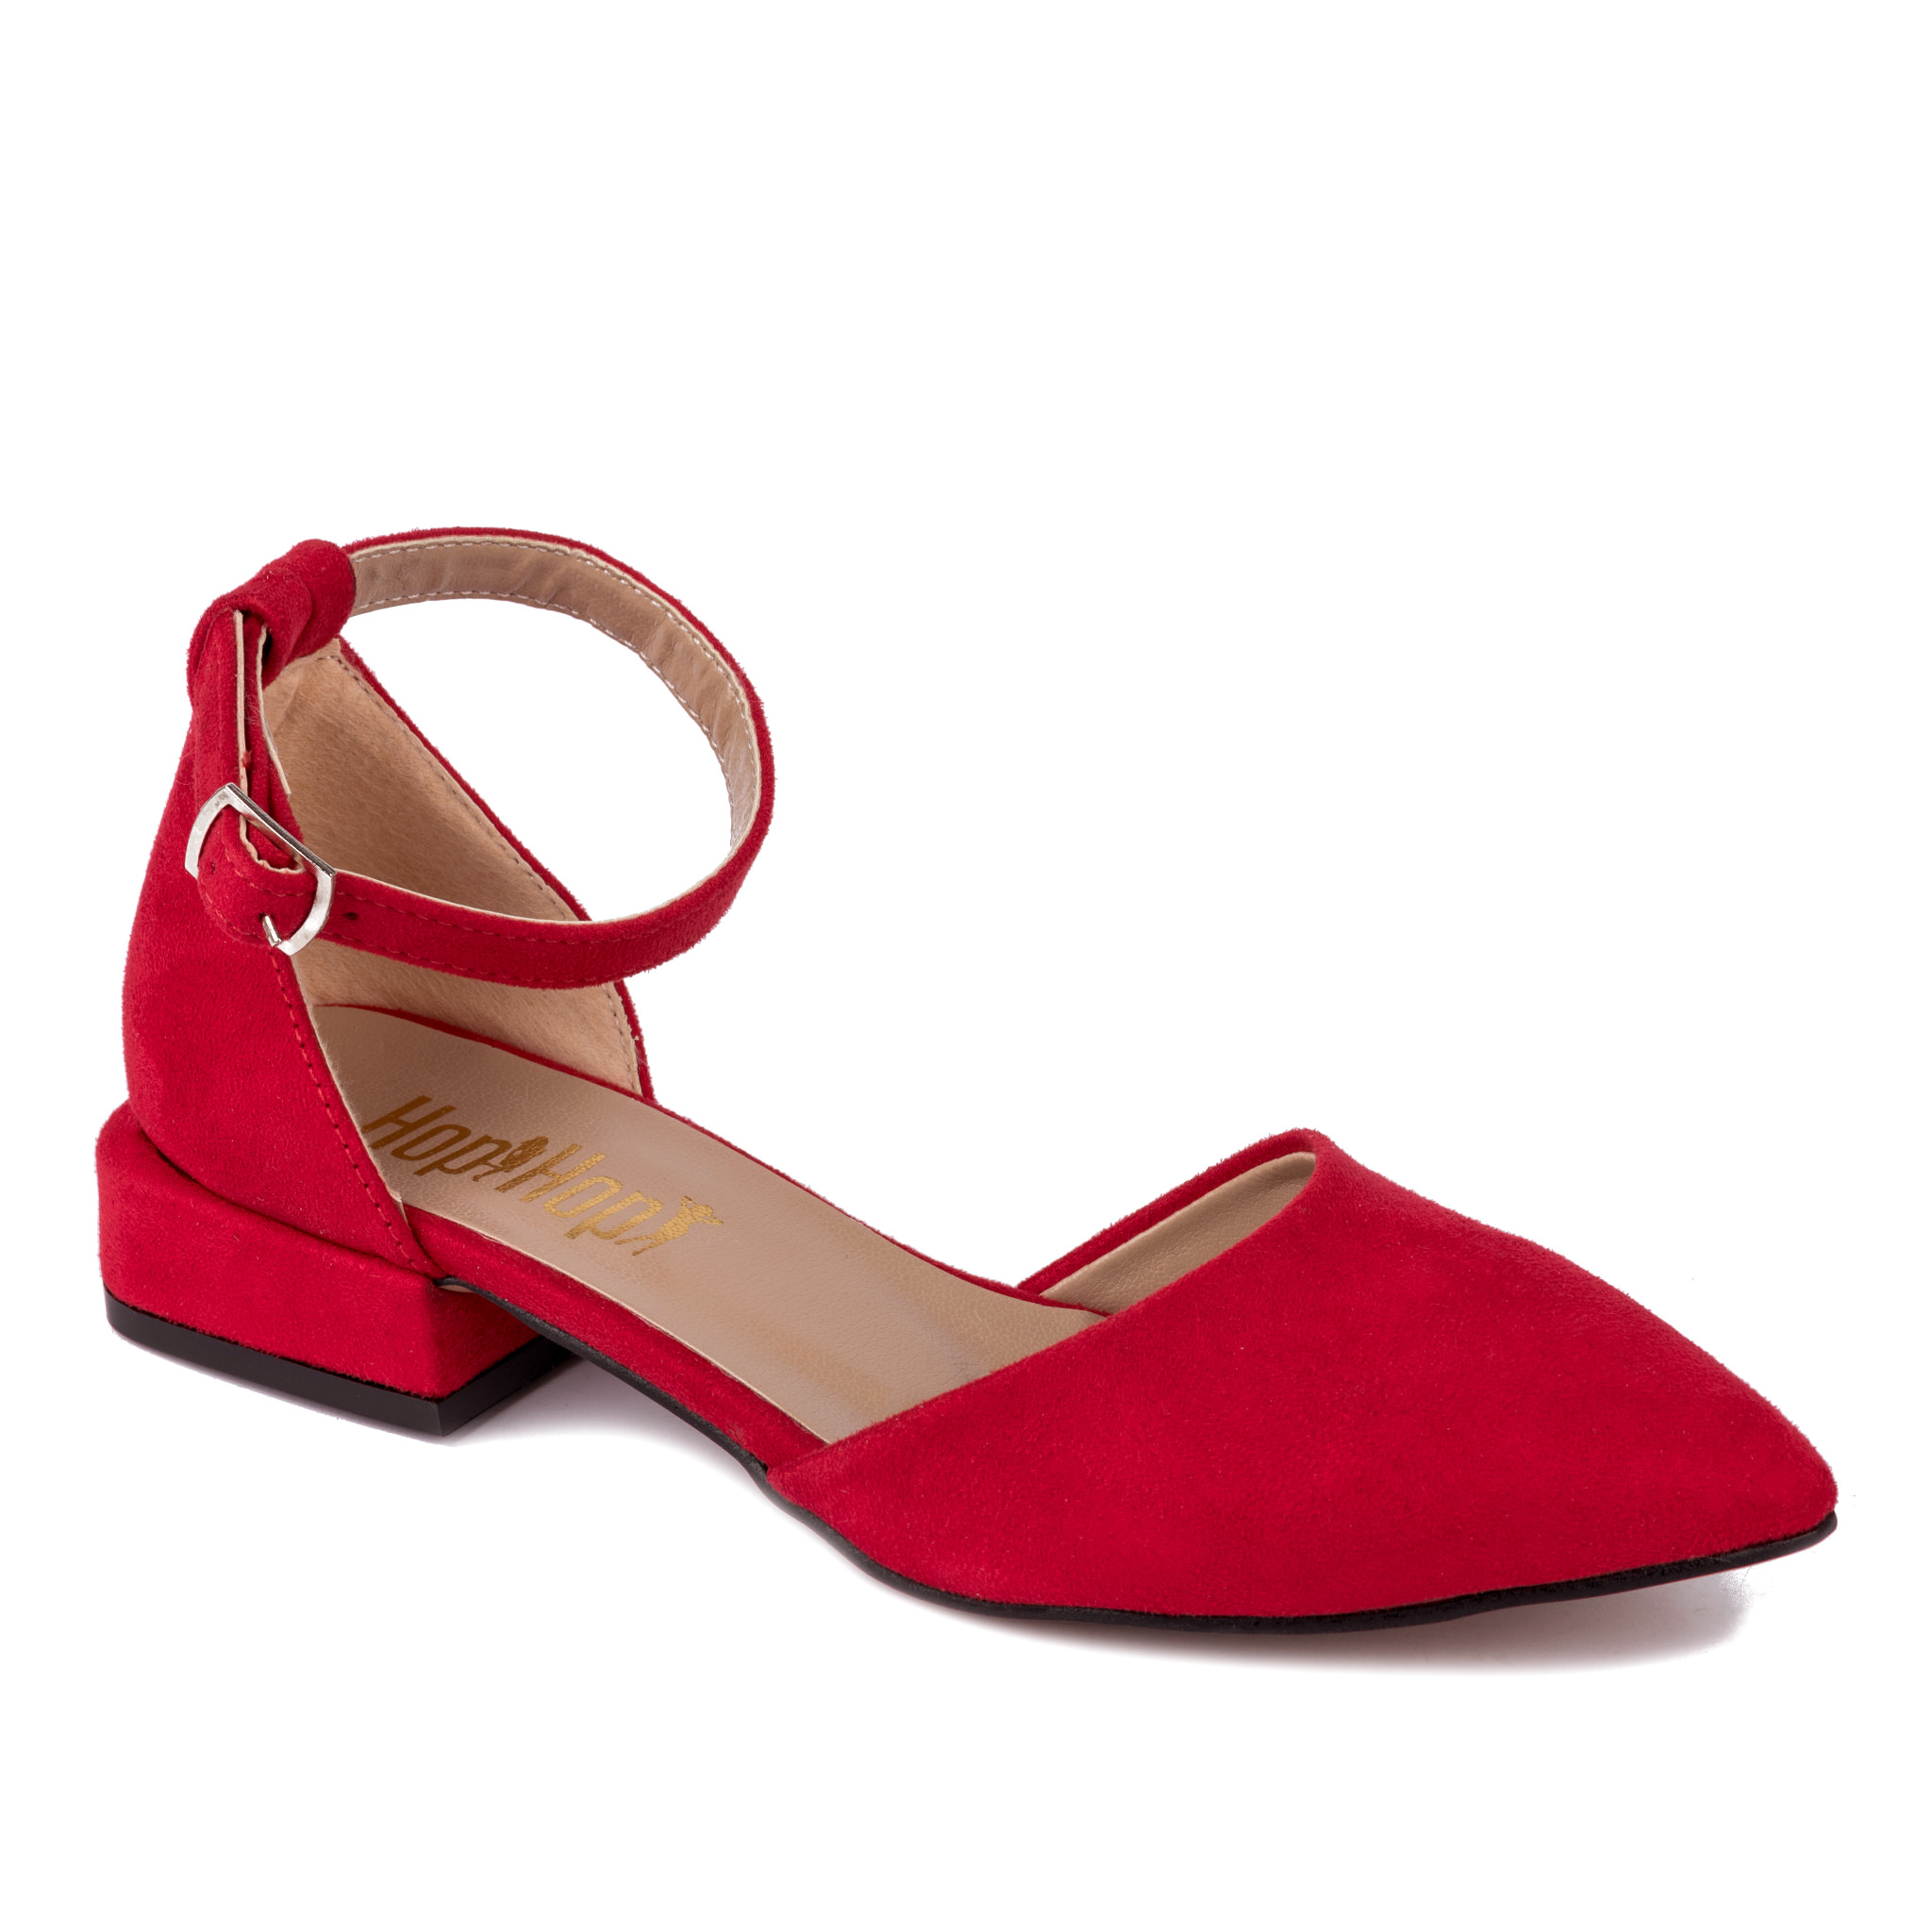 POINTED SANDALS WITH LOW BLOCK HEEL - RED